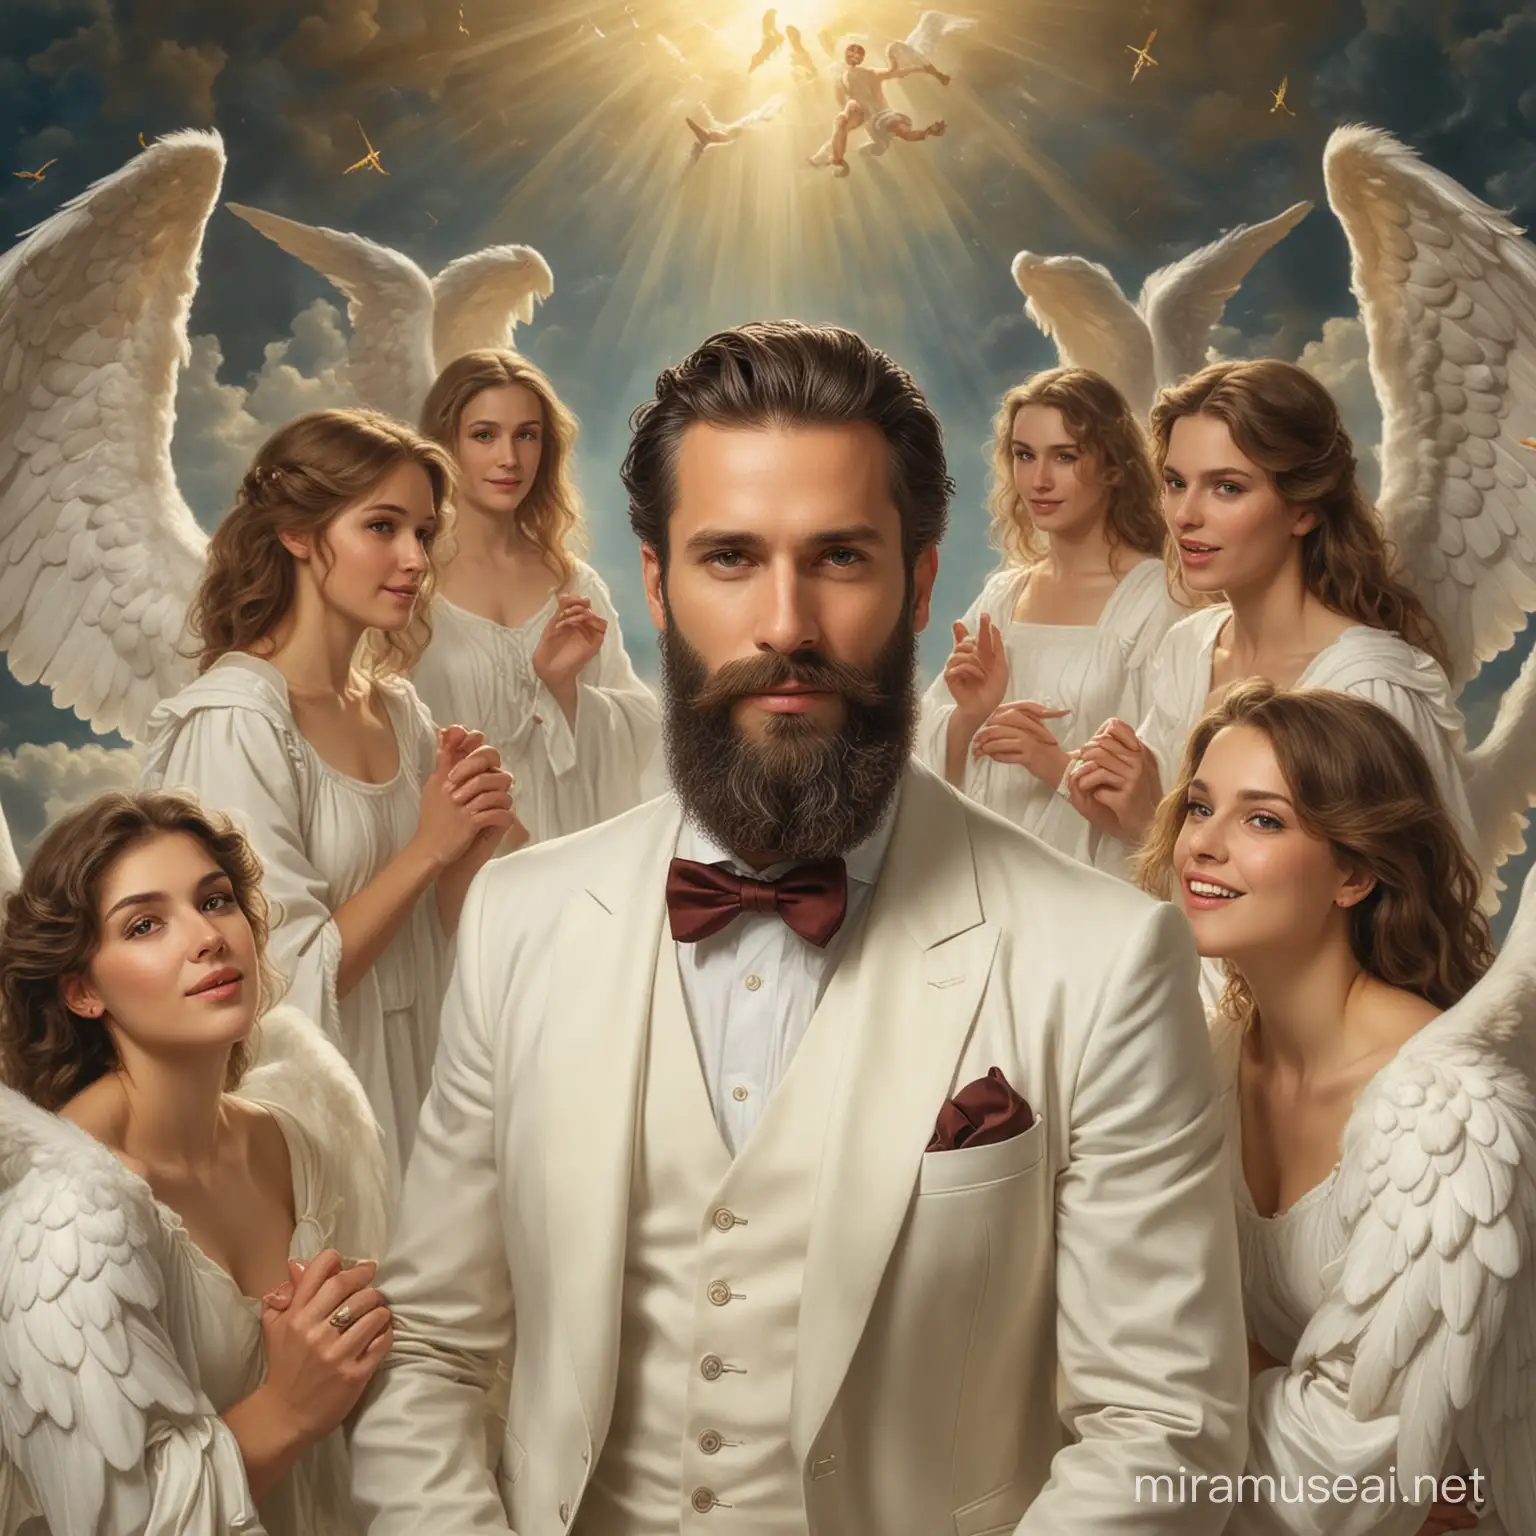 Bearded Gentleman Surrounded by Celestial Angels